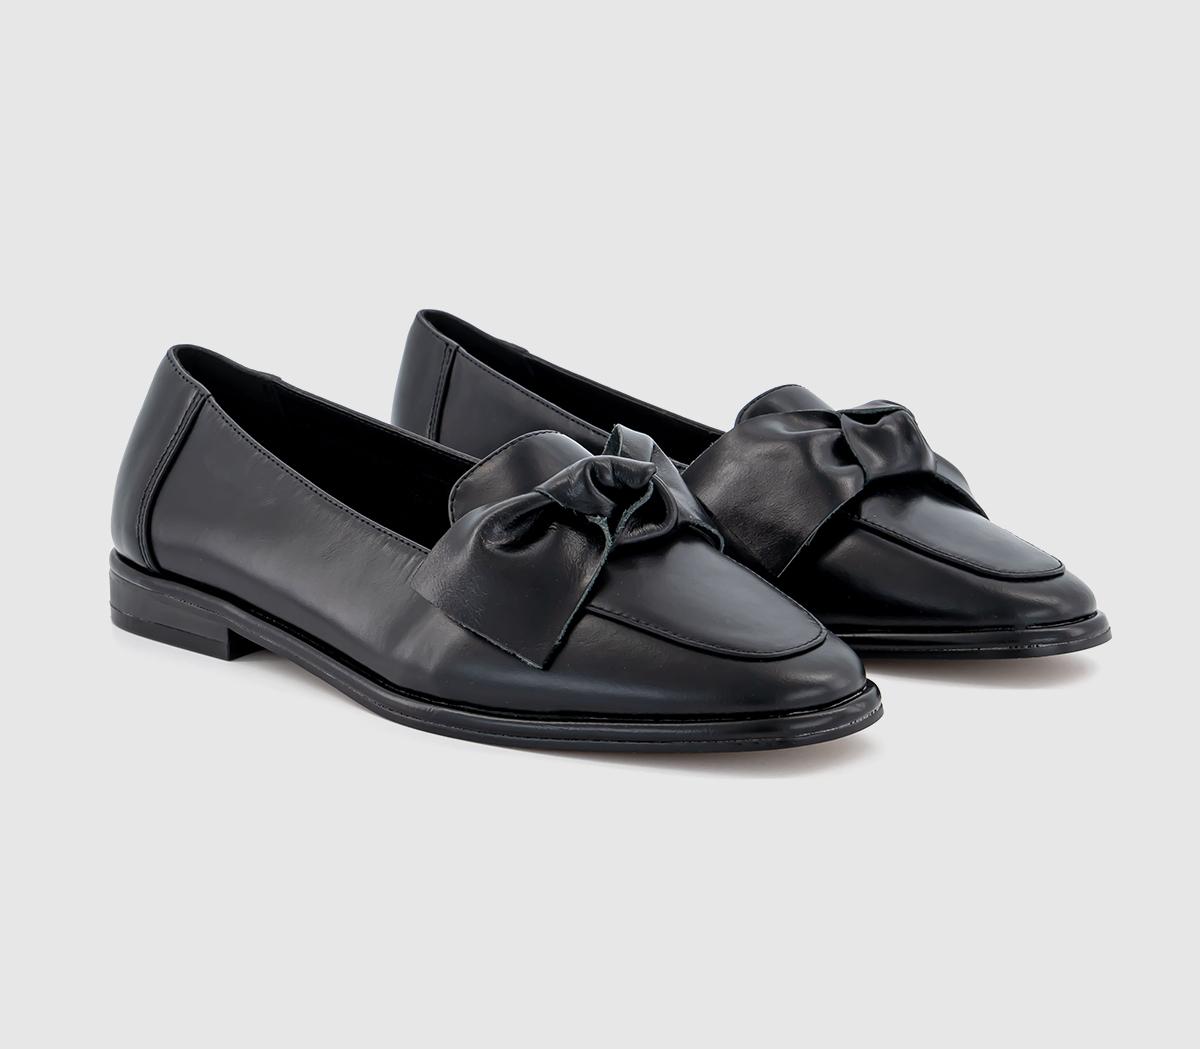 OFFICE Womens Fallon Bow Leather Loafer Black Leather, 4